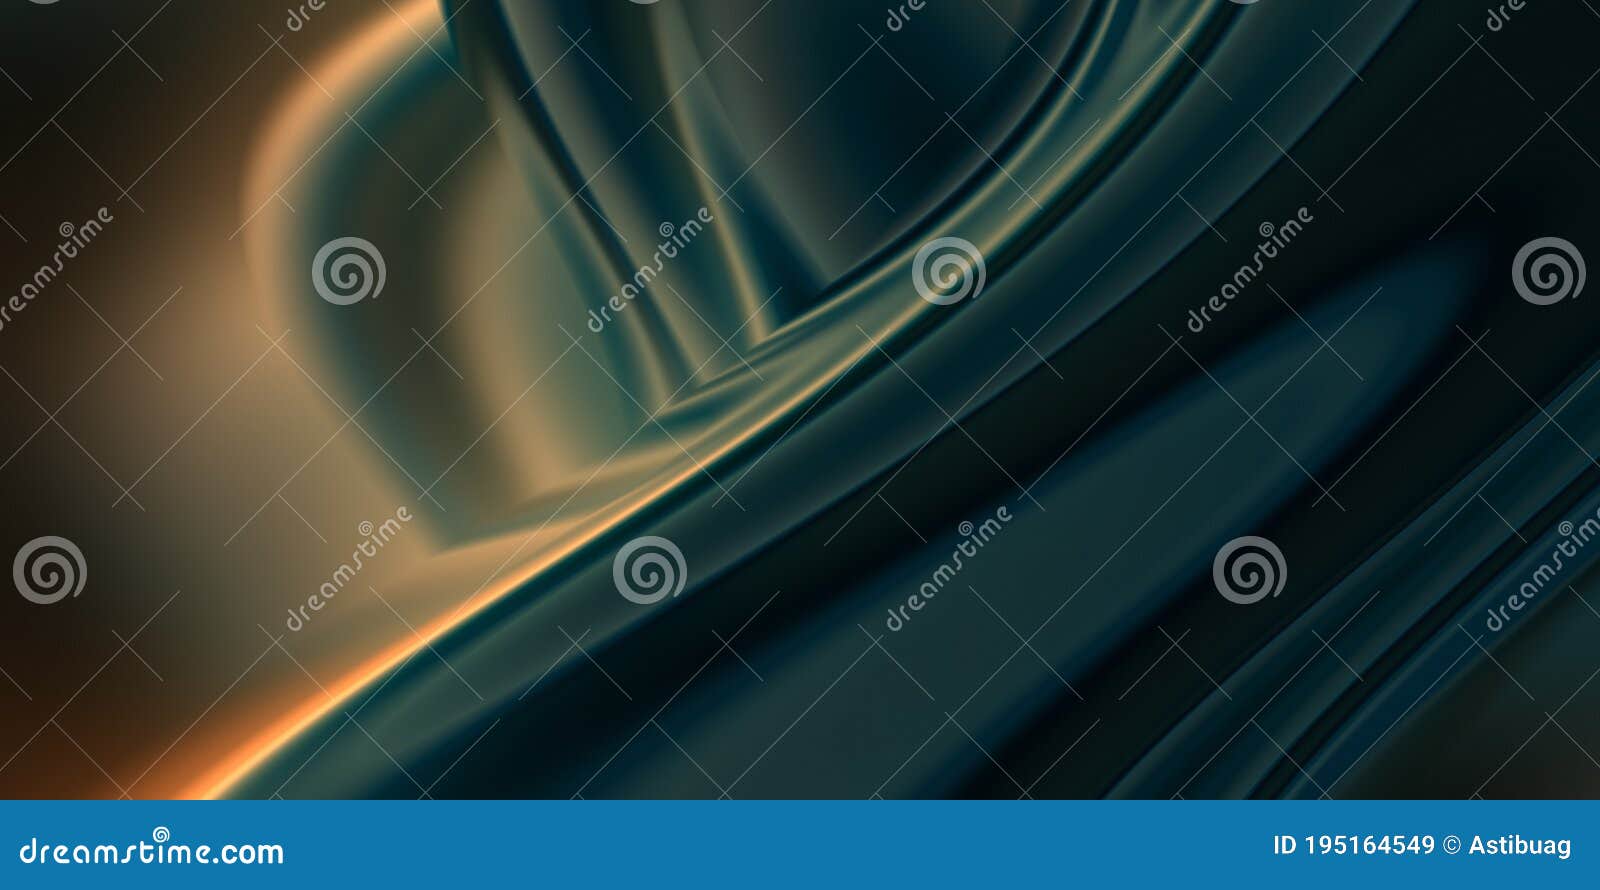 fluid mercurial substance. abstract iridescent background. smooth gradient layout for decoration.